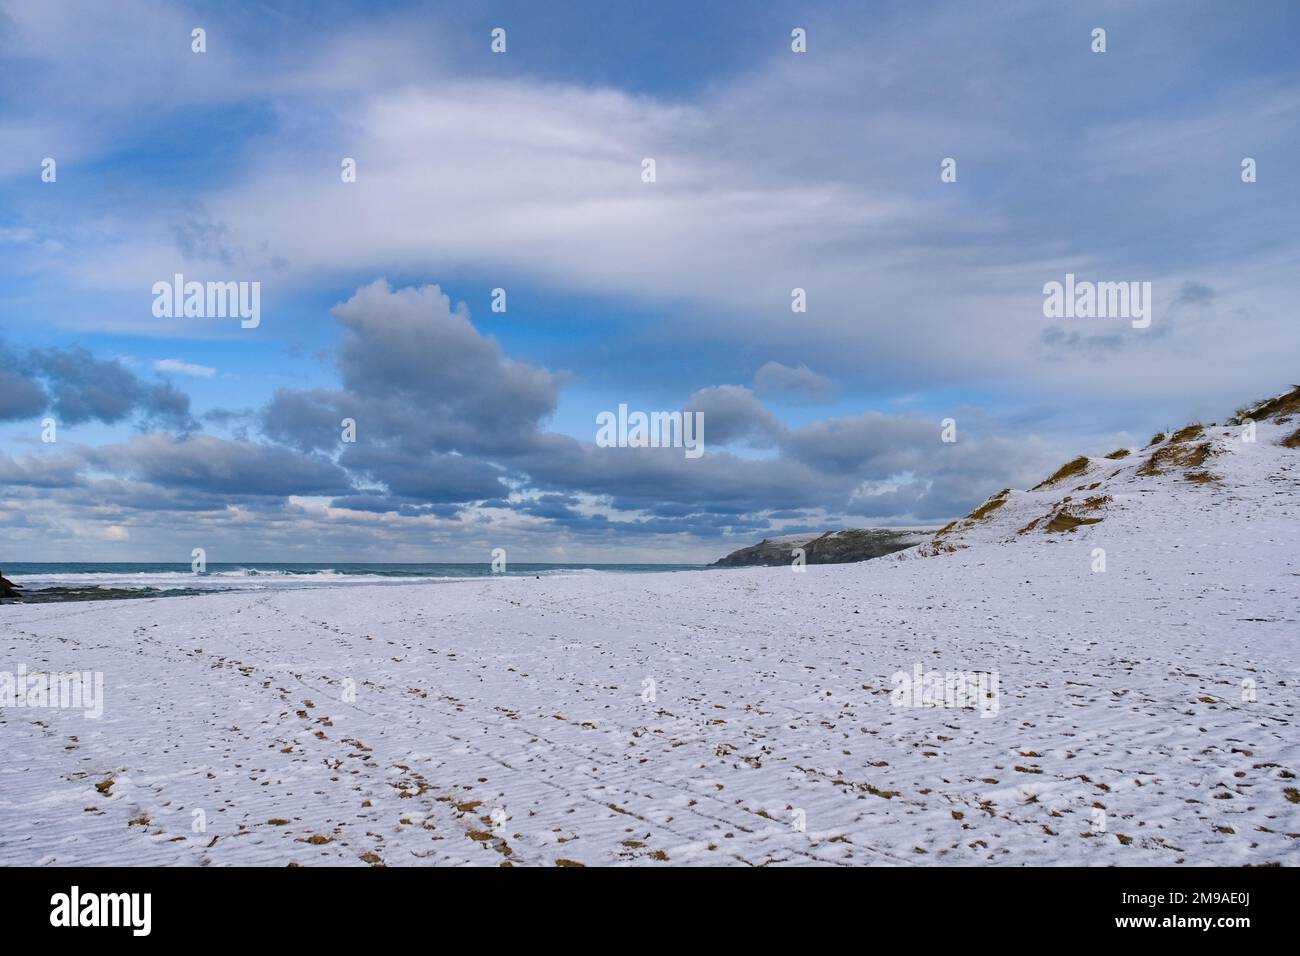 Holywell bay, Cornwall, UK. 17th Jan 2023. UK Weather..  Much of west Cornwall was hit by heavy snow overnight, resulting in snow on the beach at Holywell bay near Newquay today. Credit Simon Maycock / Alamy Live News. Stock Photo